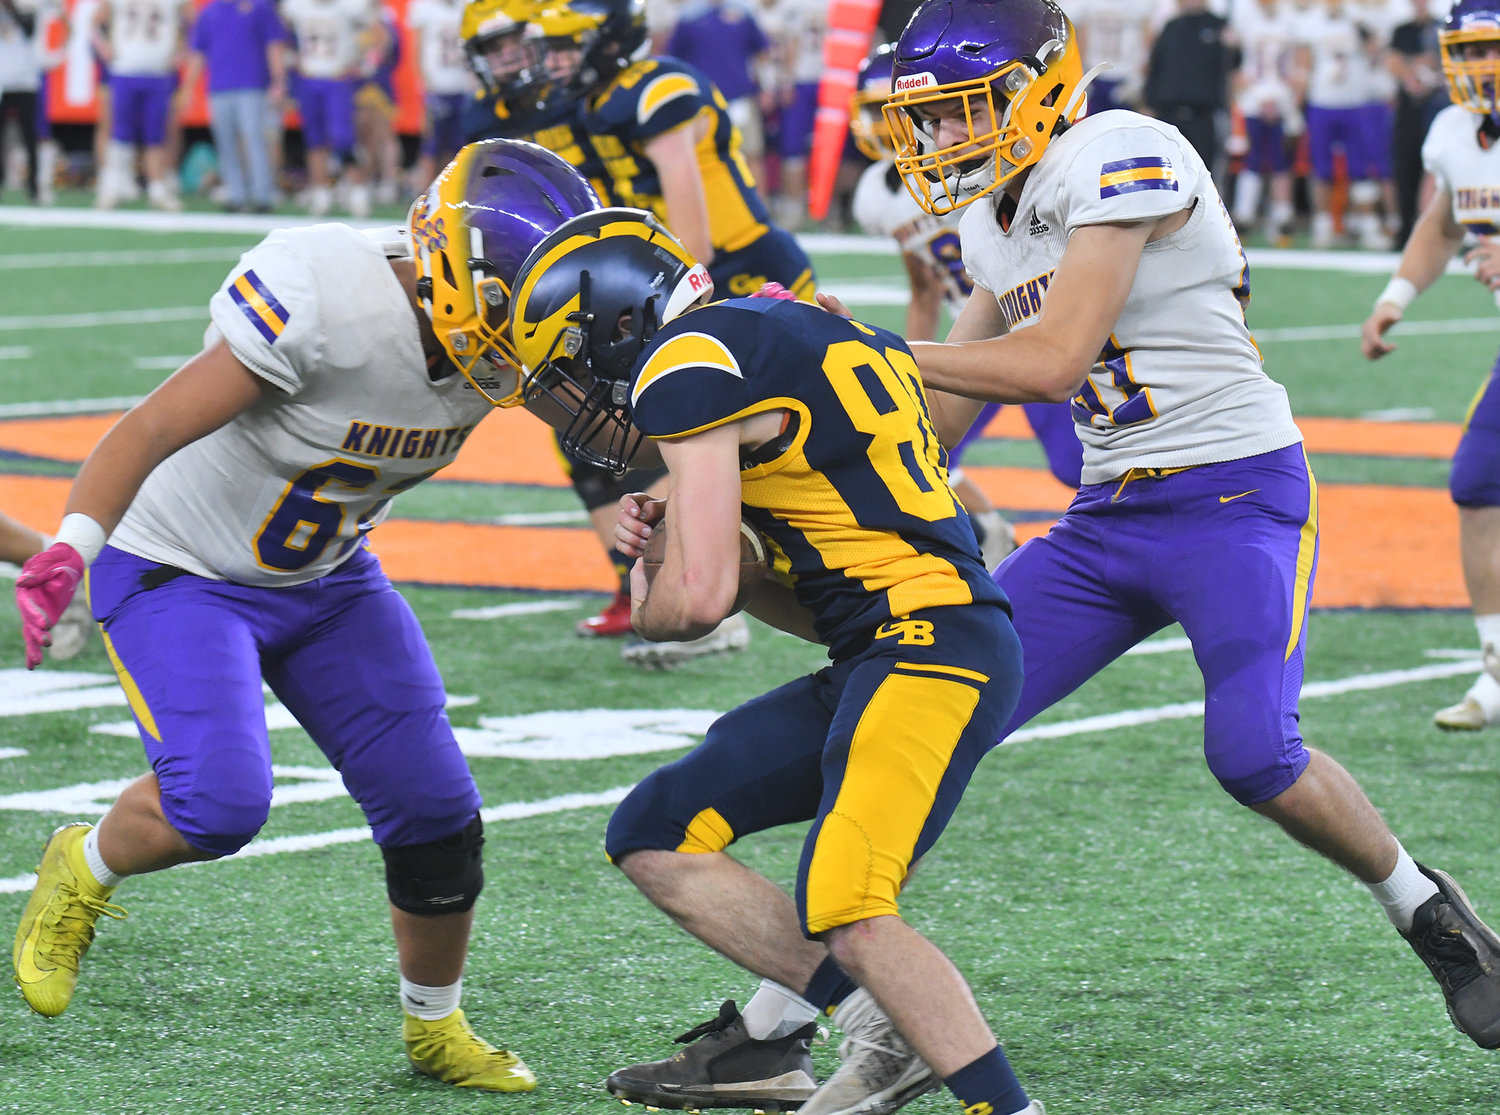 Holland Patent defensive linemen Brent Mott, left, and Devyn Priz team up to tackle General Brown’s John Chamberlain in the second quartter at JMA Wireless Dome in Syracuse Sunday in the Section III Class C title game. General Brown won 41-0.